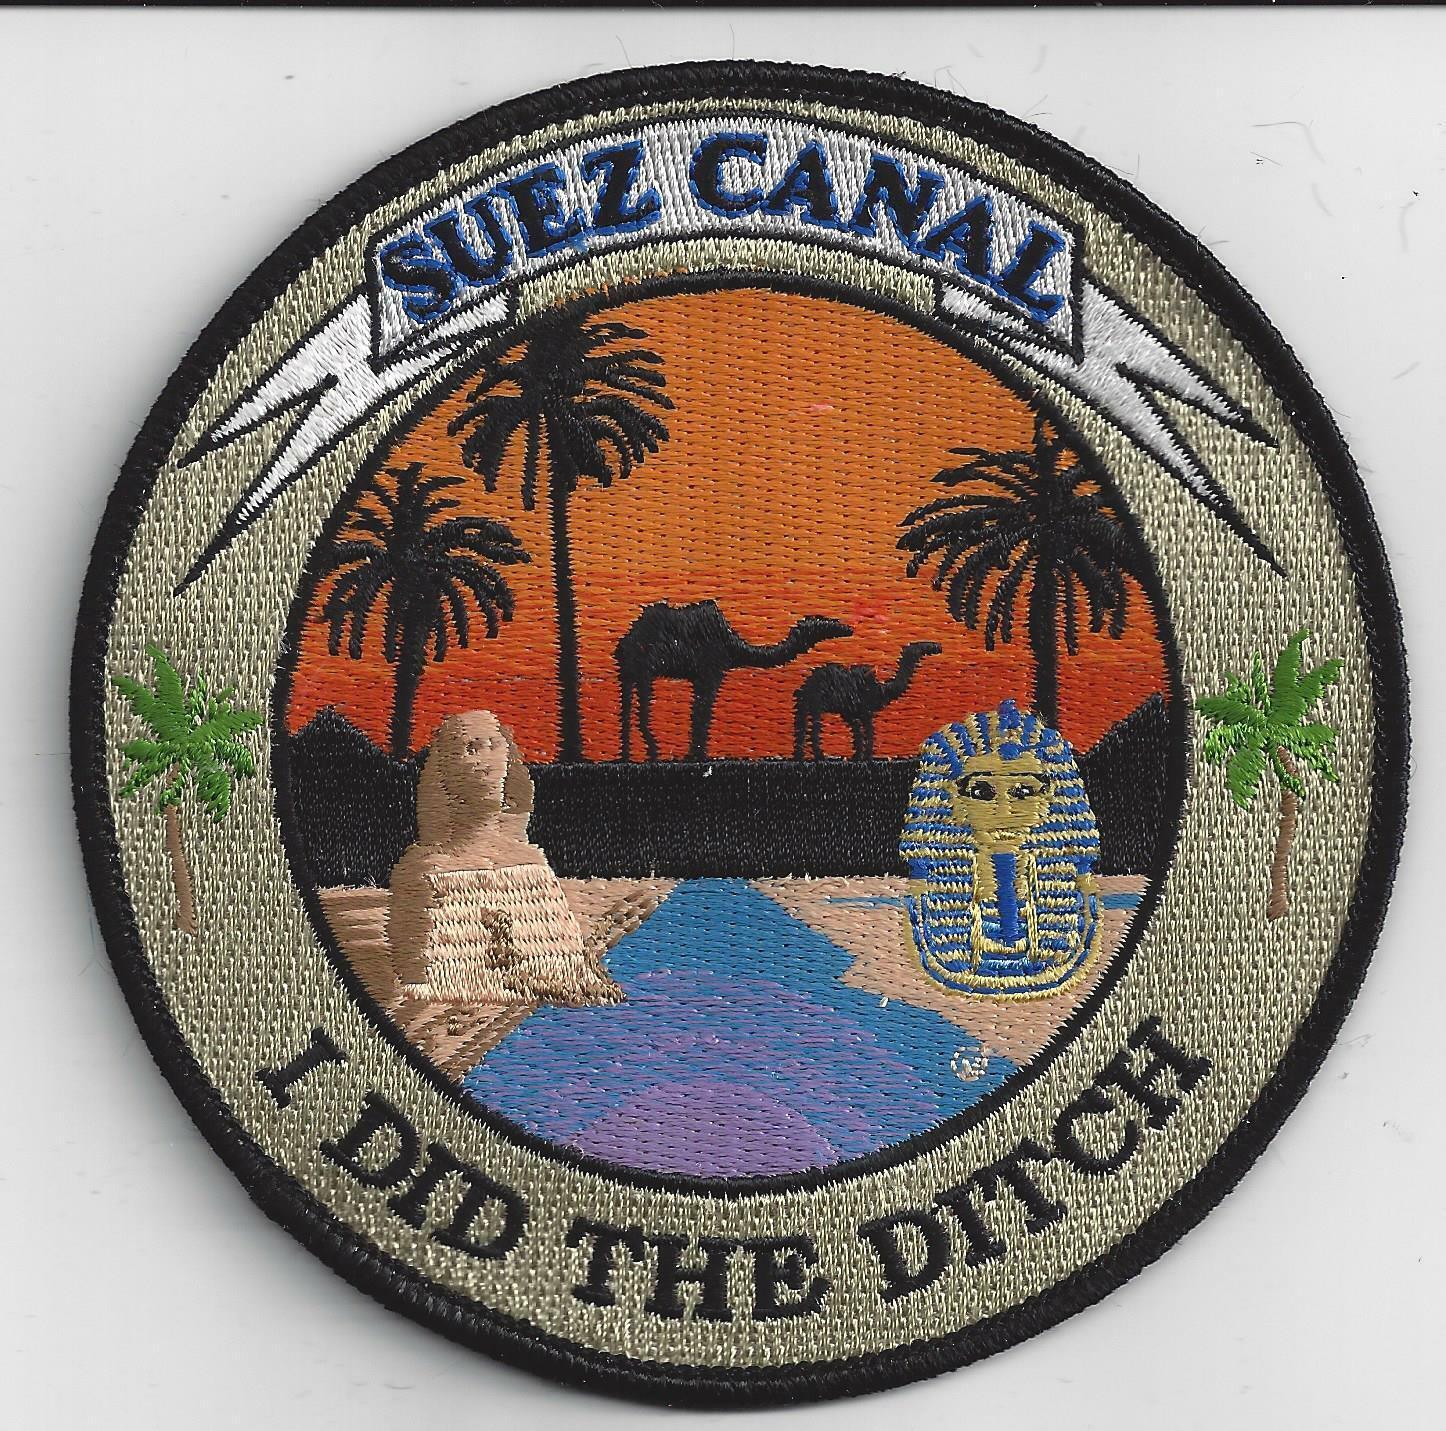 Suez Canal -  I did the ditch - BC Patch No. c7152